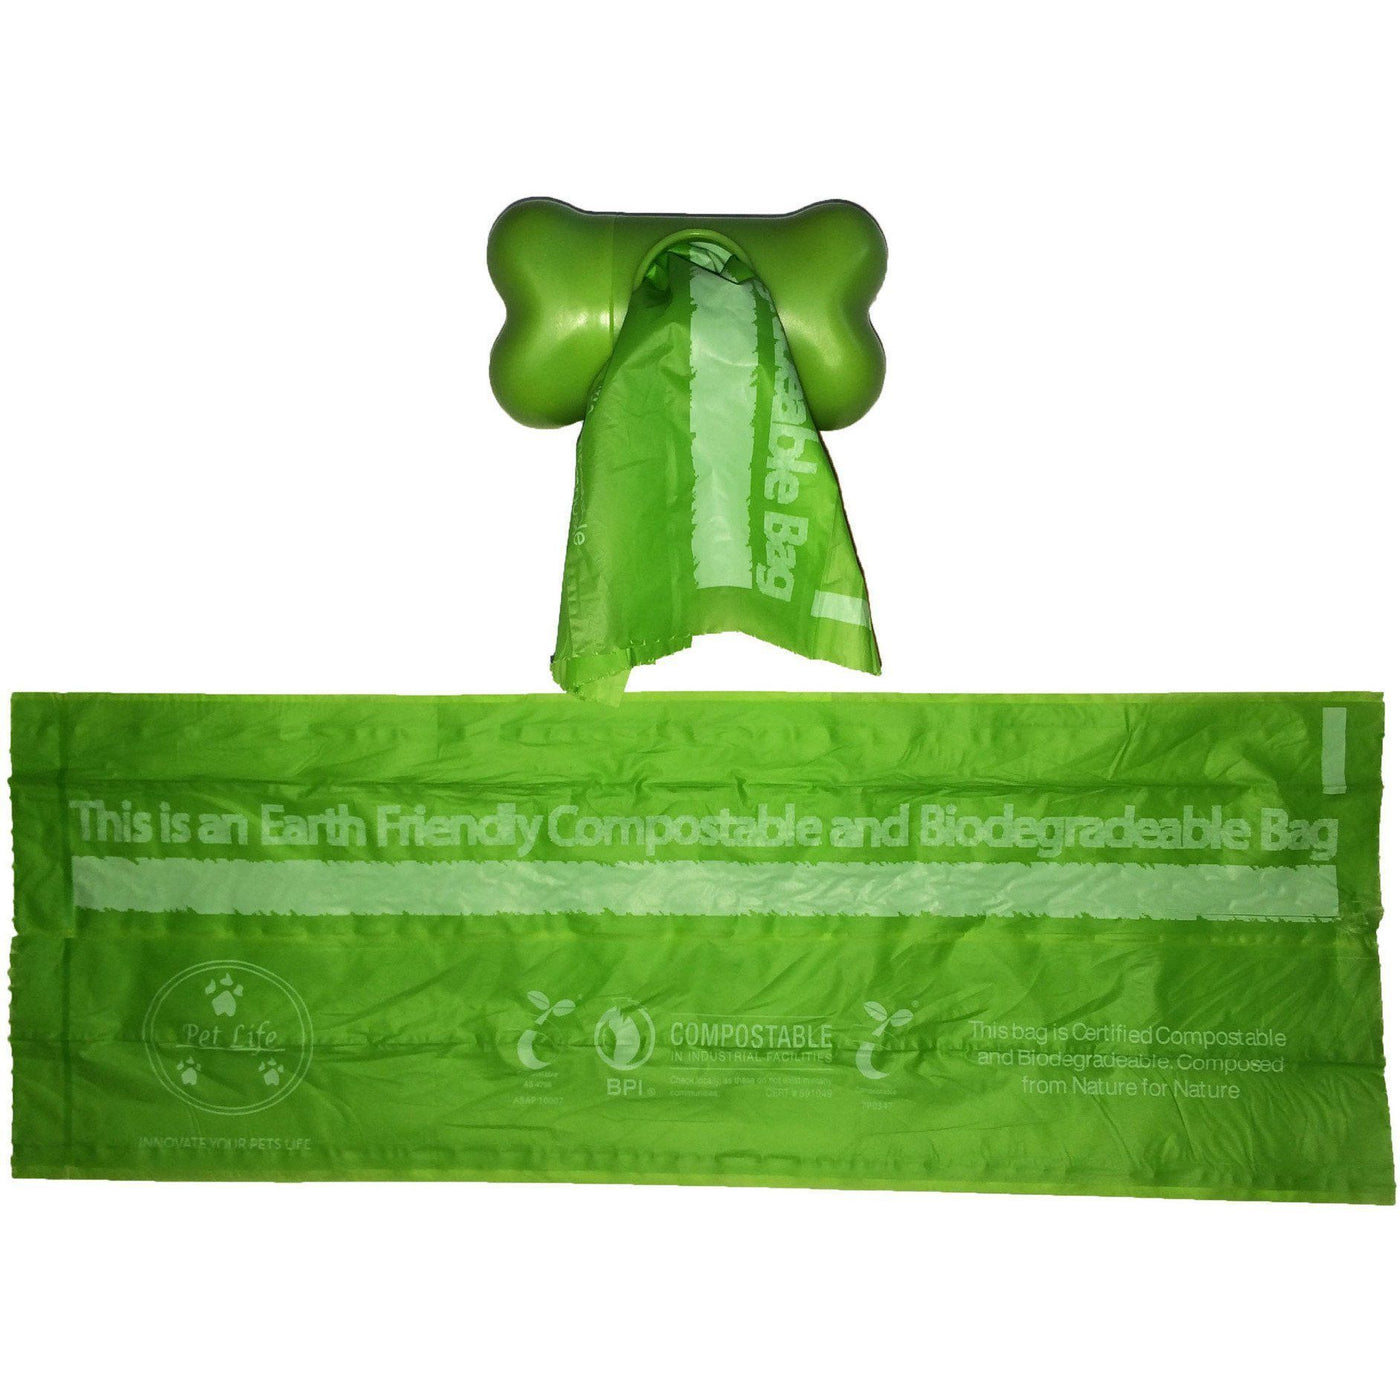 Only Natural Pet Recycled Dispenser and Poop Bags in Green | PetSmart